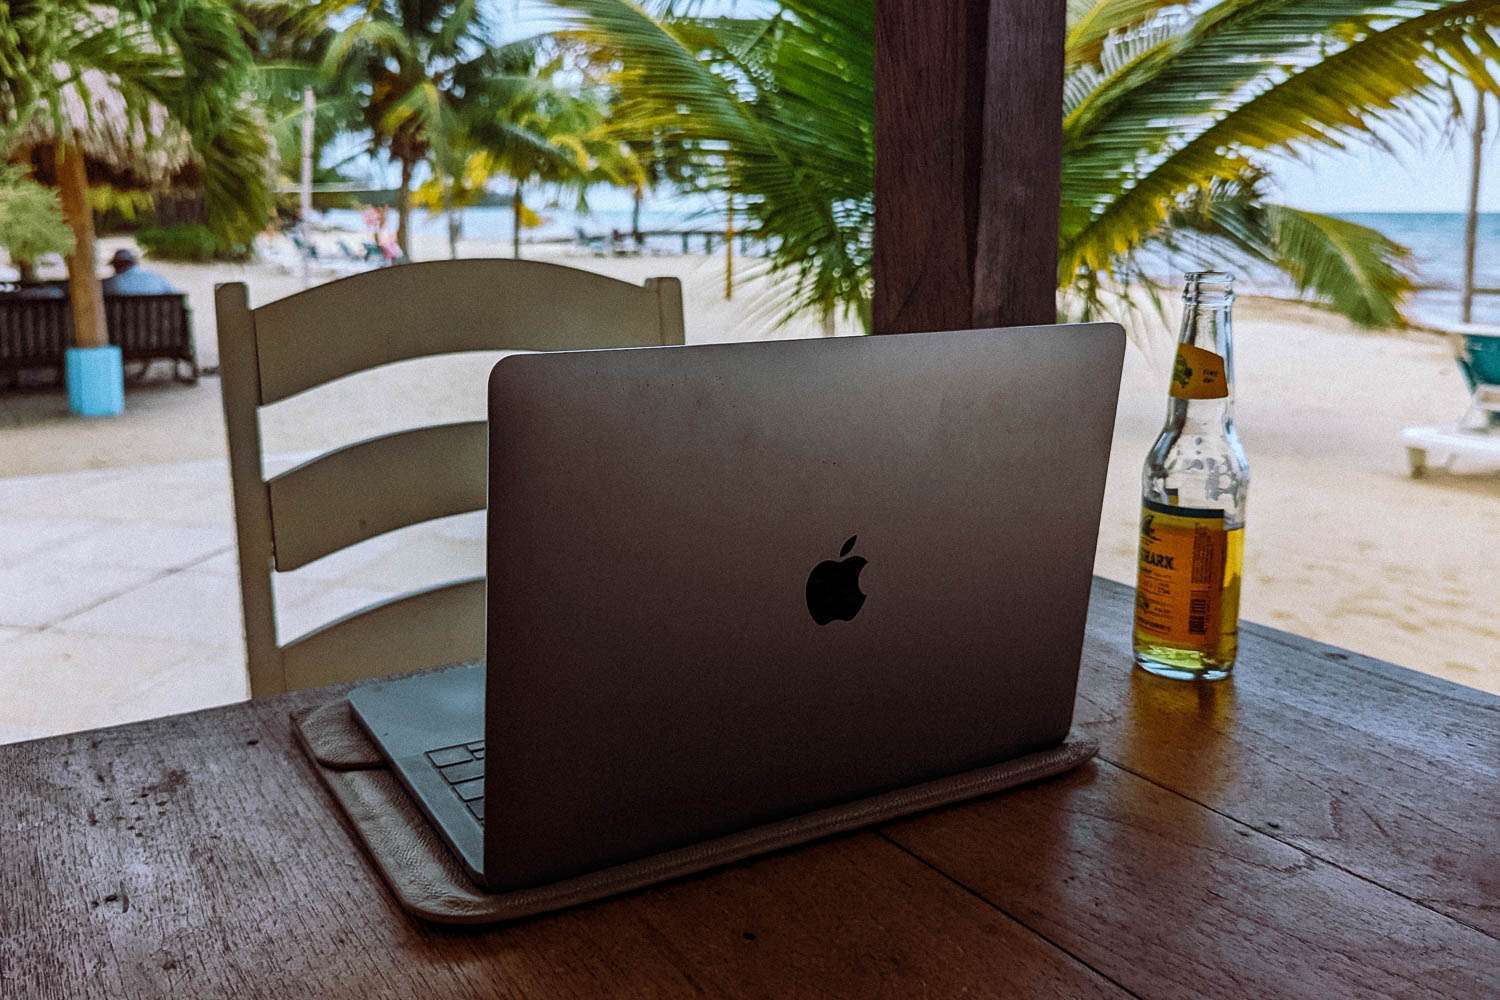 Rachel Off Duty: A Laptop and a Beer on the Beach